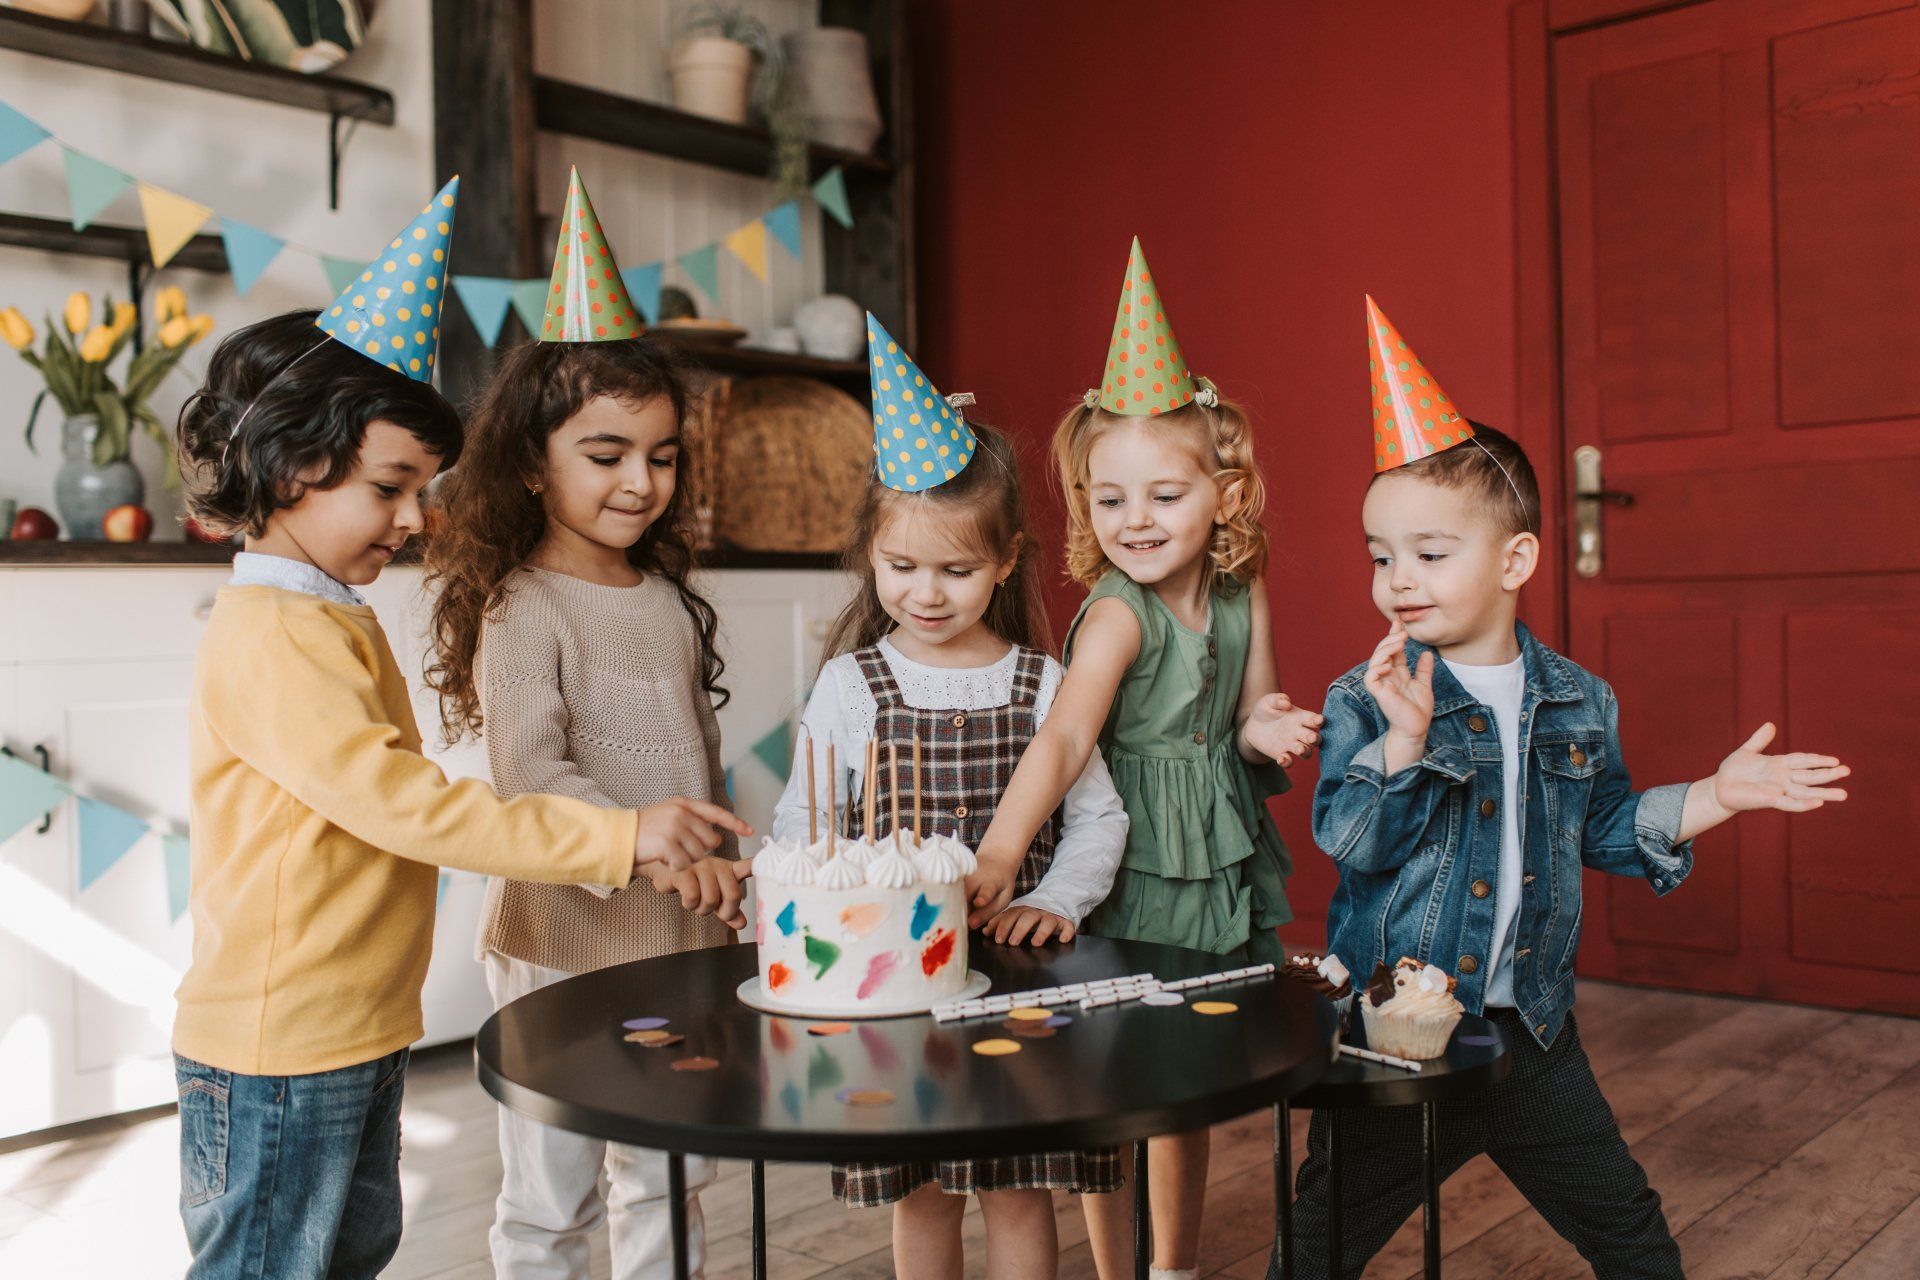 a group of children wearing party hats are cutting a birthday cake .